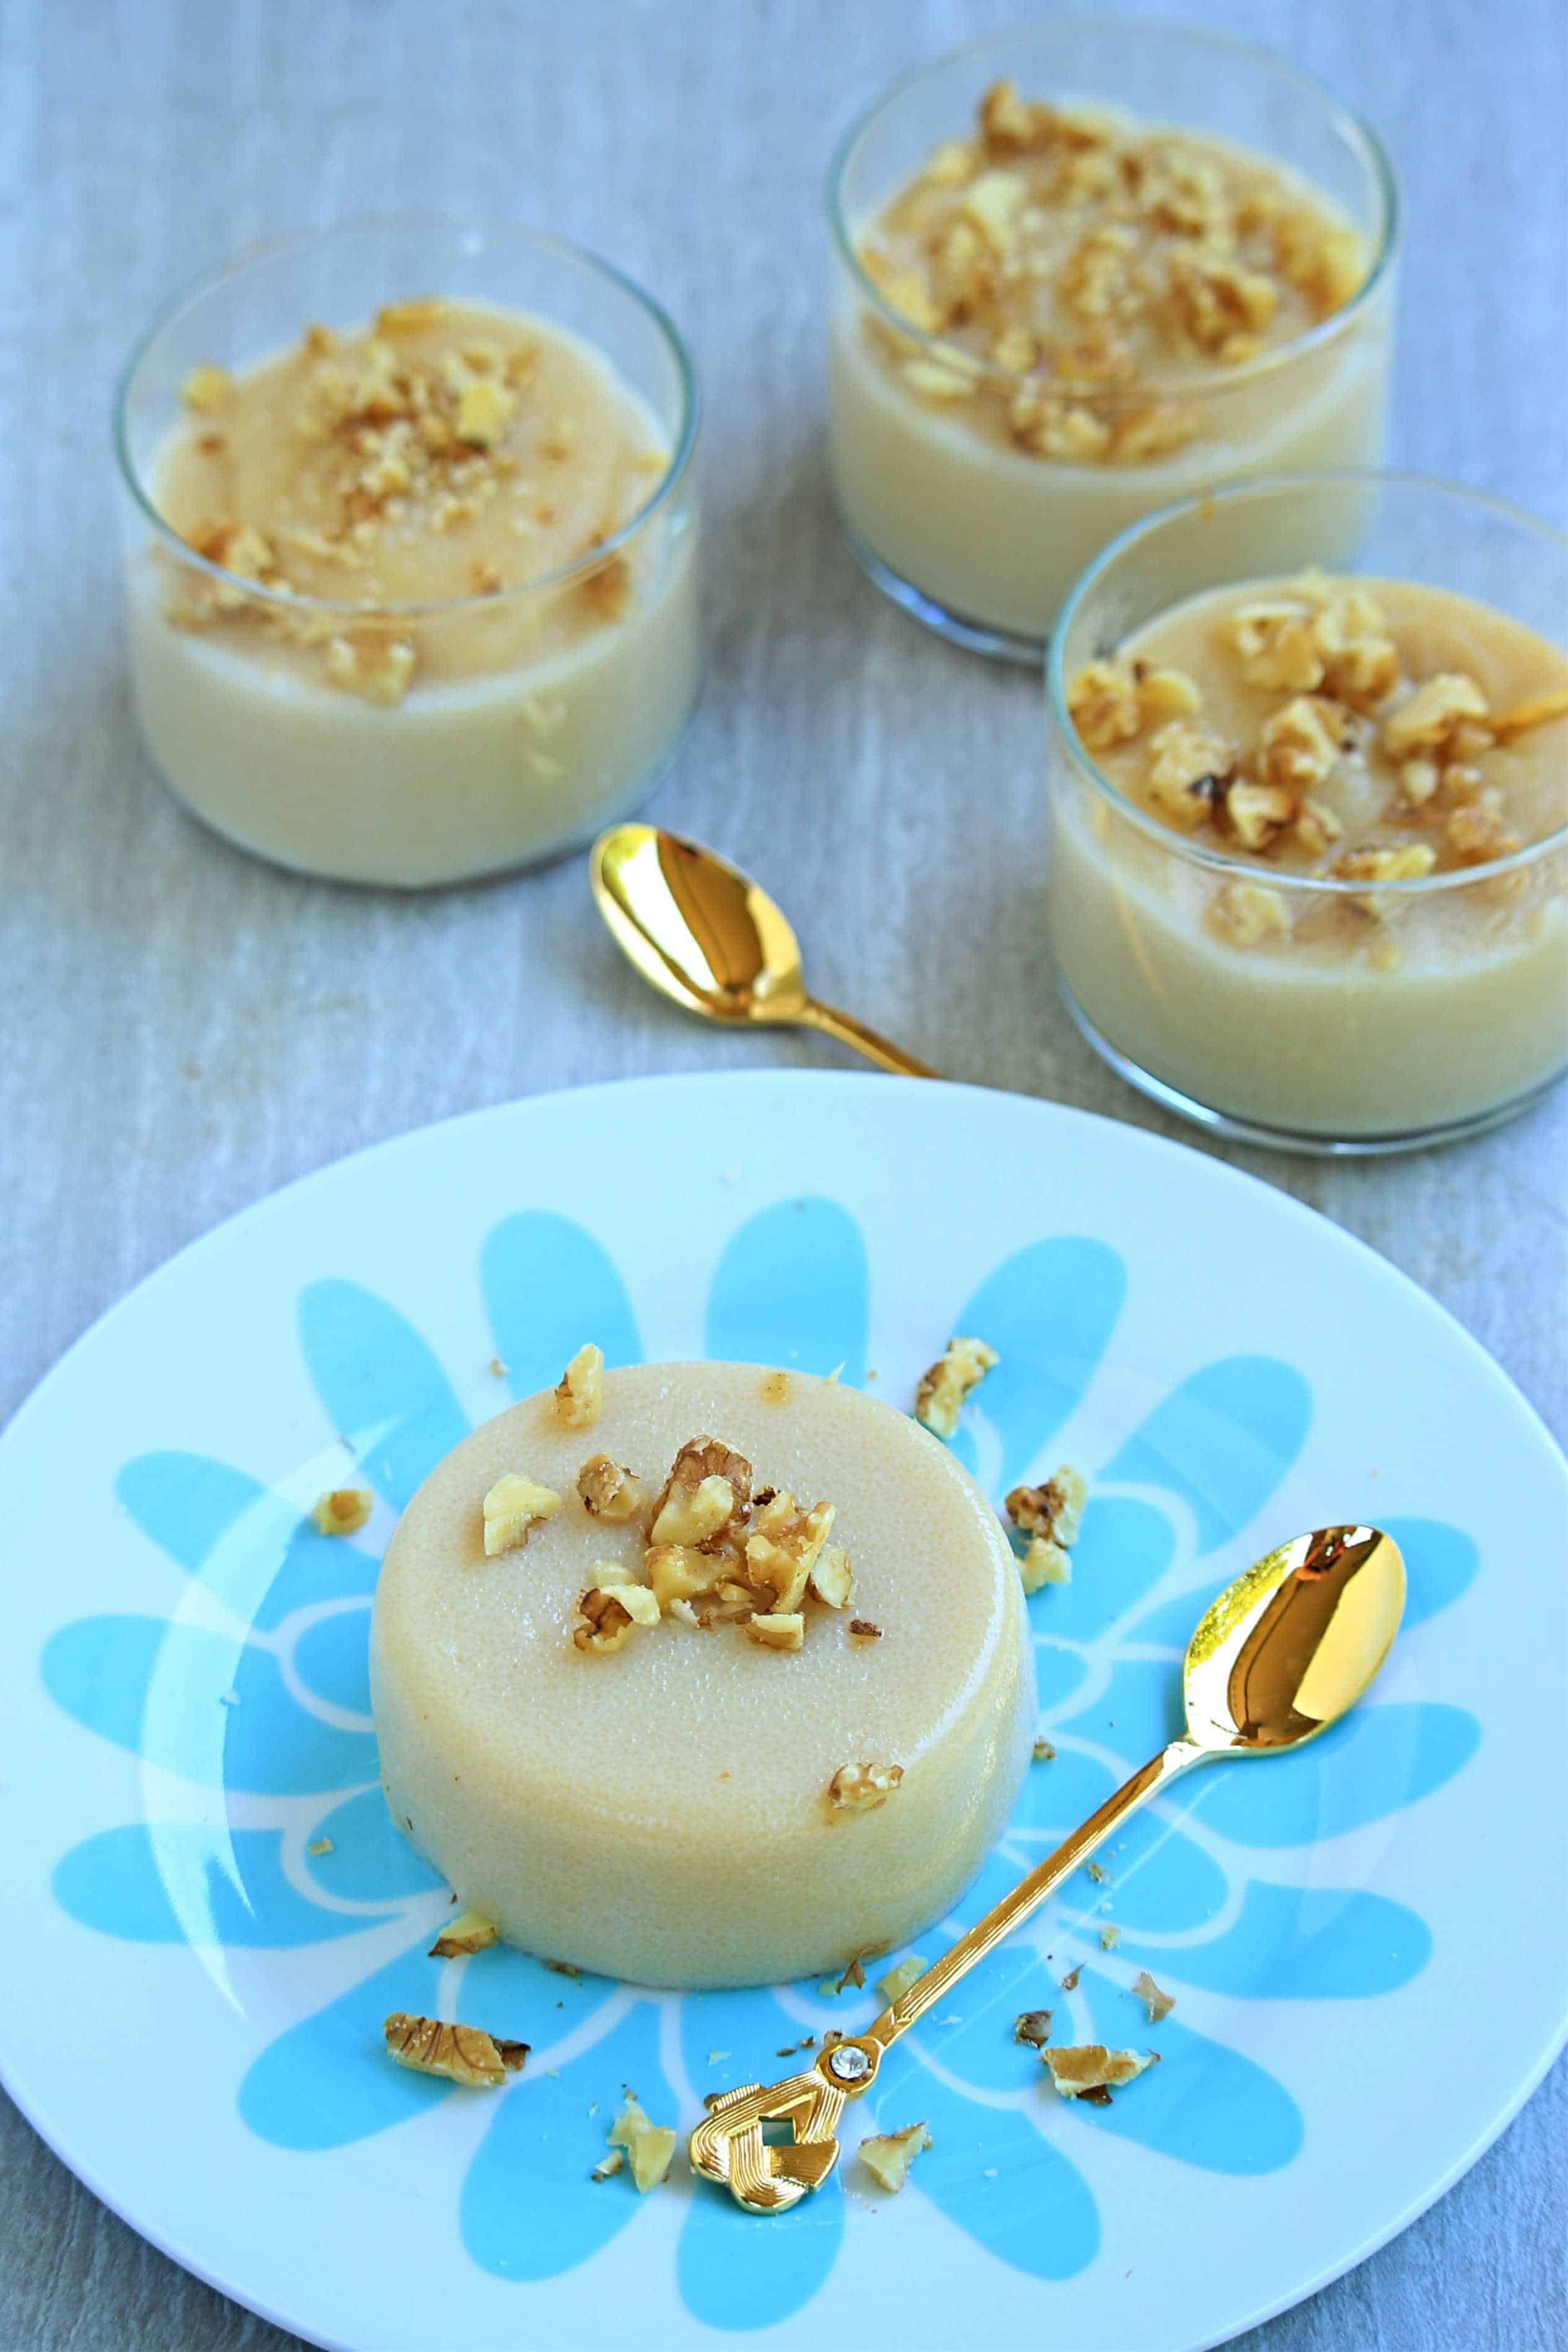 Turkish Semolina Pudding on a plate and in glass bowls